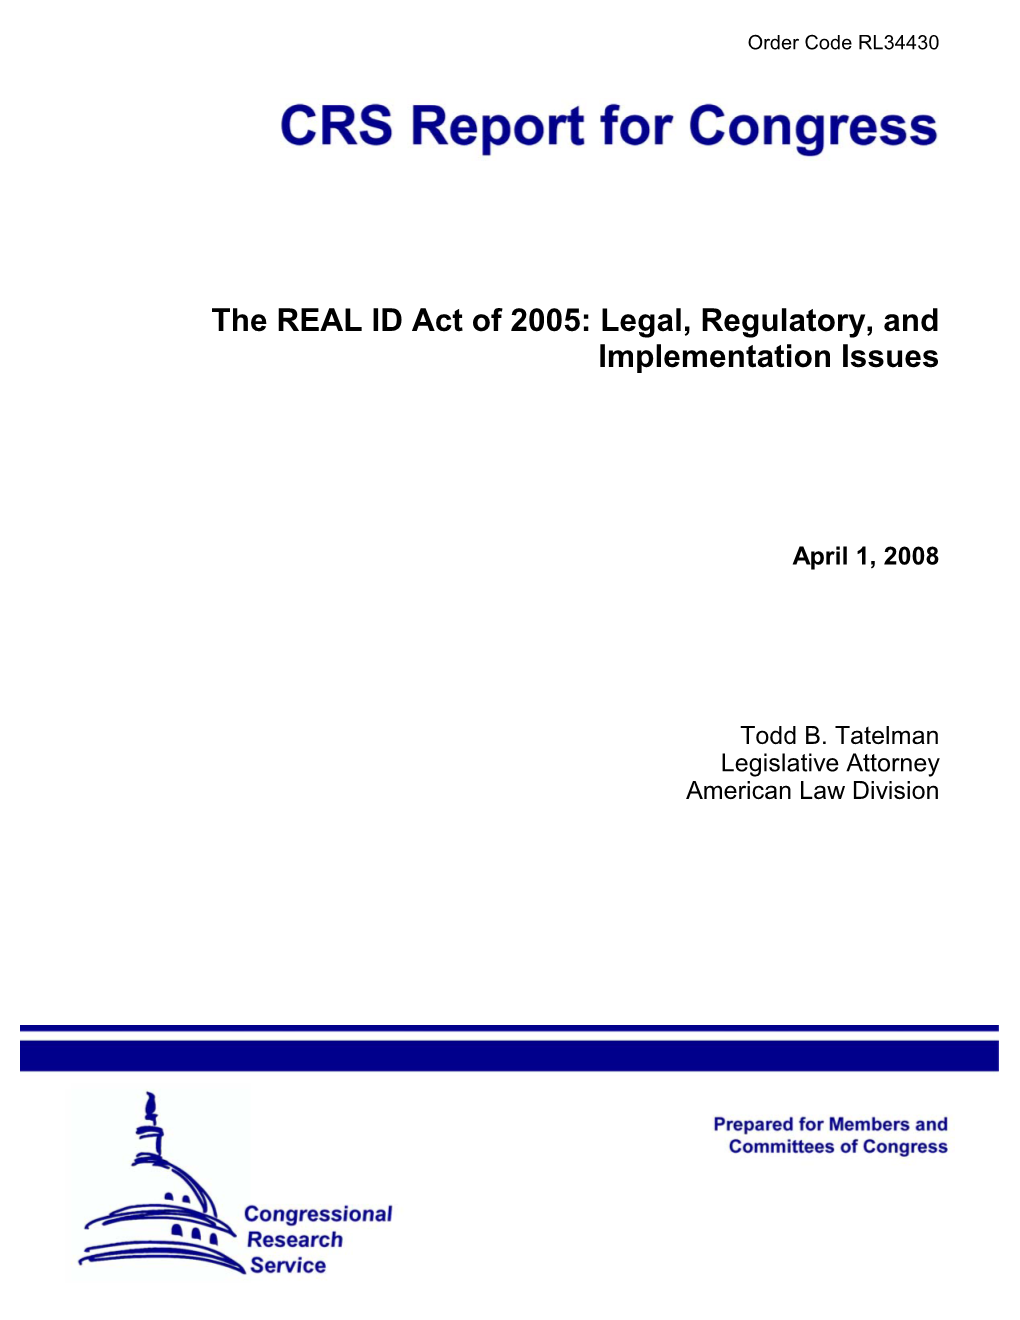 REAL ID Act of 2005: Legal, Regulatory, and Implementation Issues